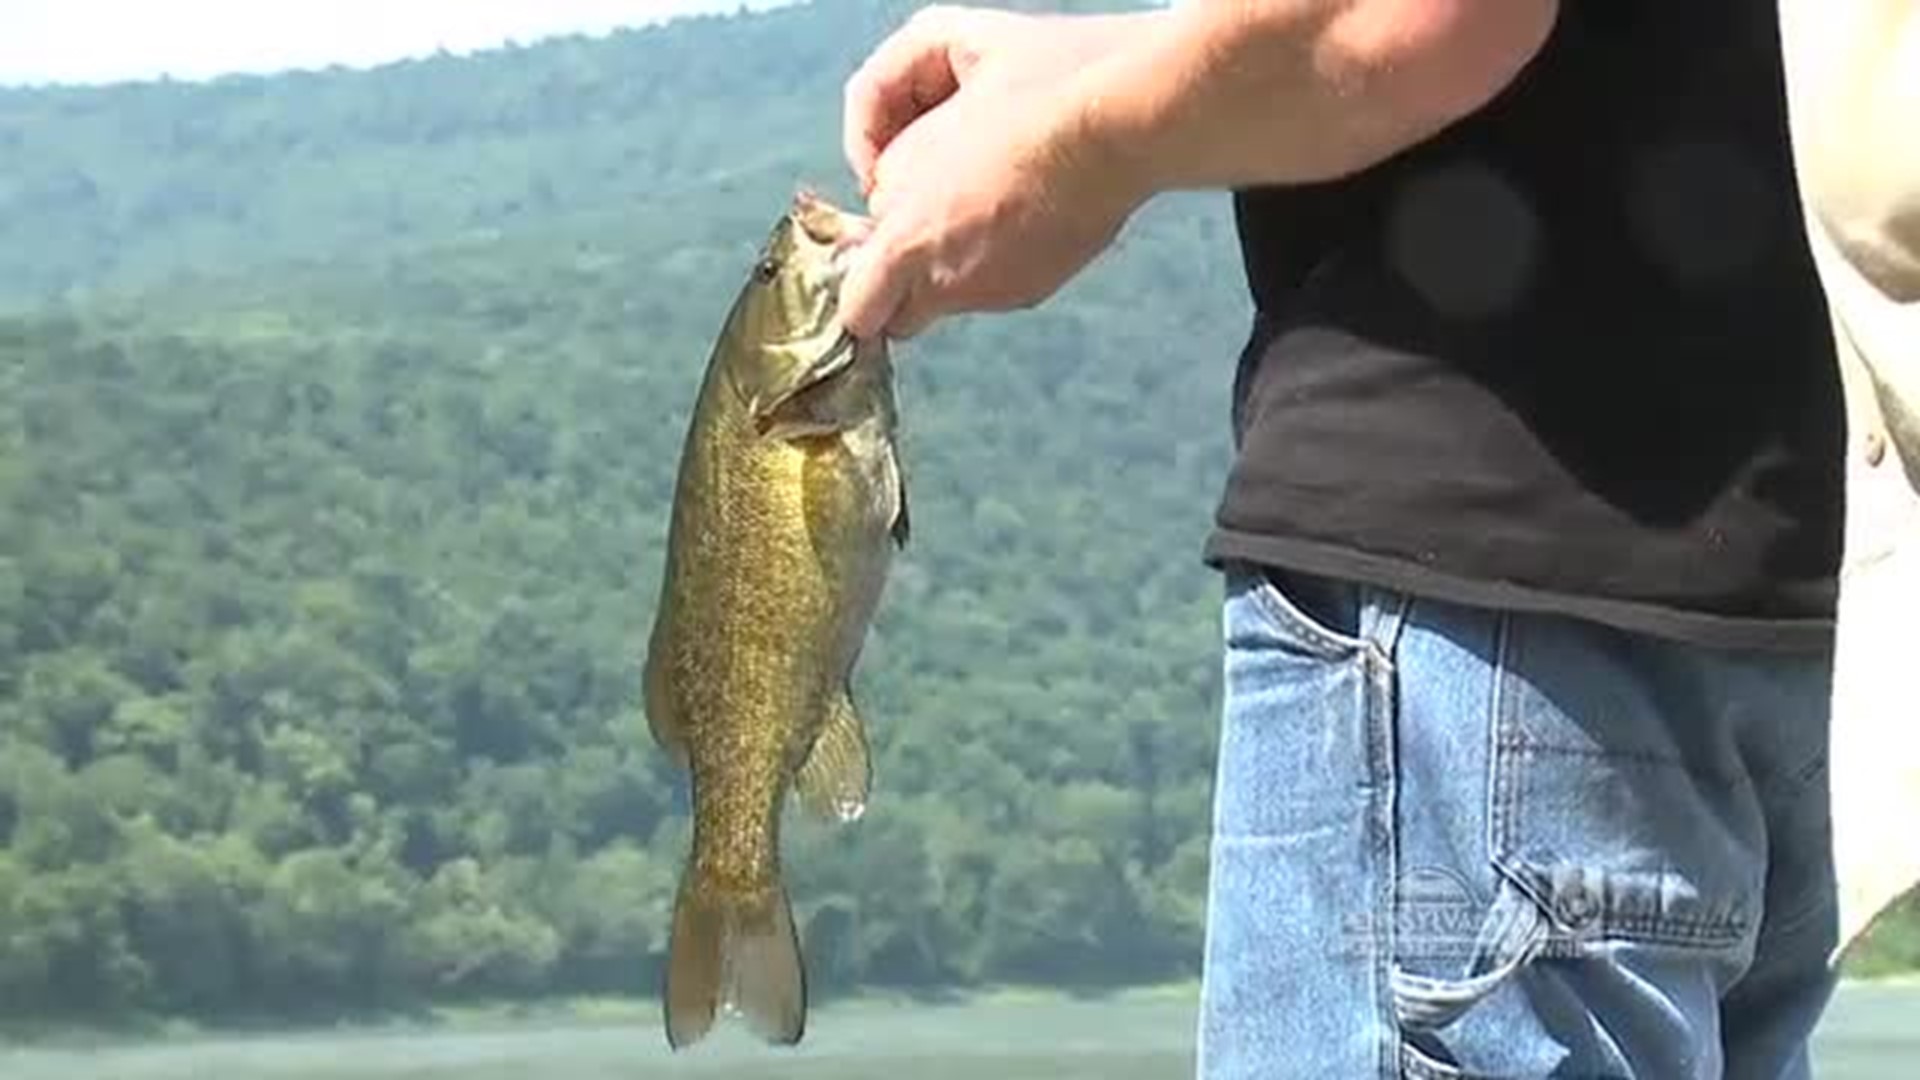 Even More Bass Fishing with Boyd's NEPA Guiding Service